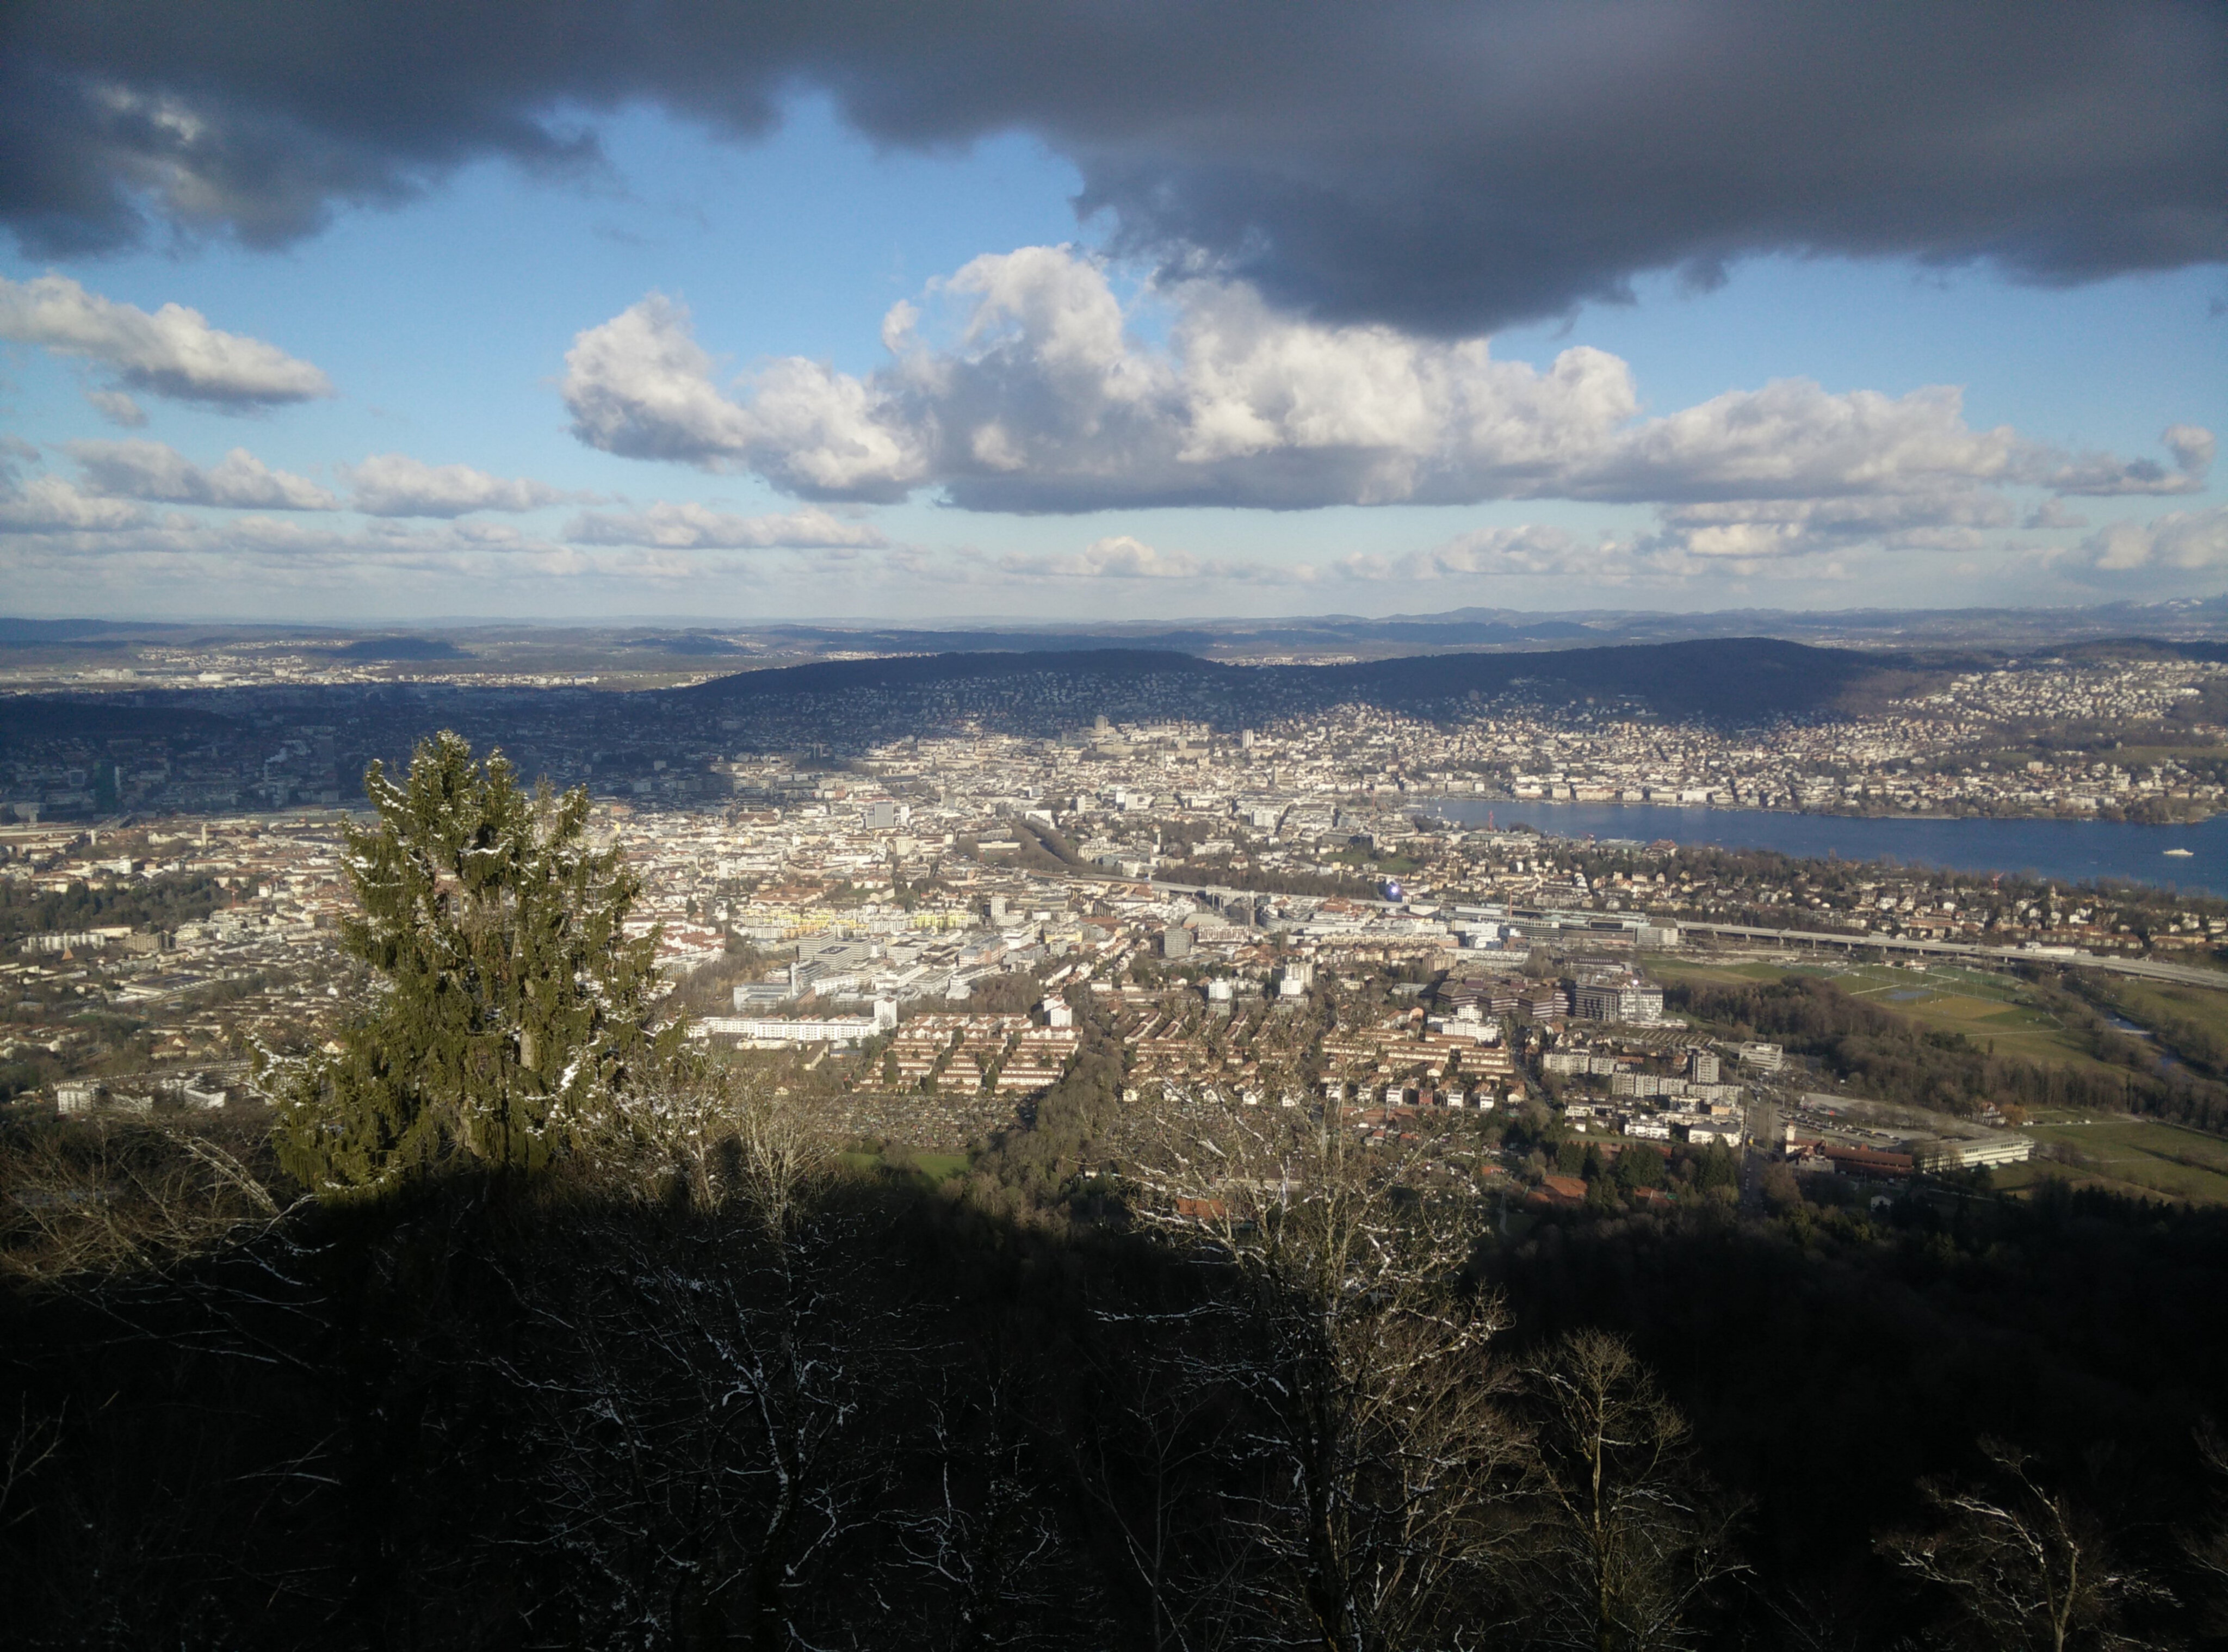 Picture from the view over Zurich